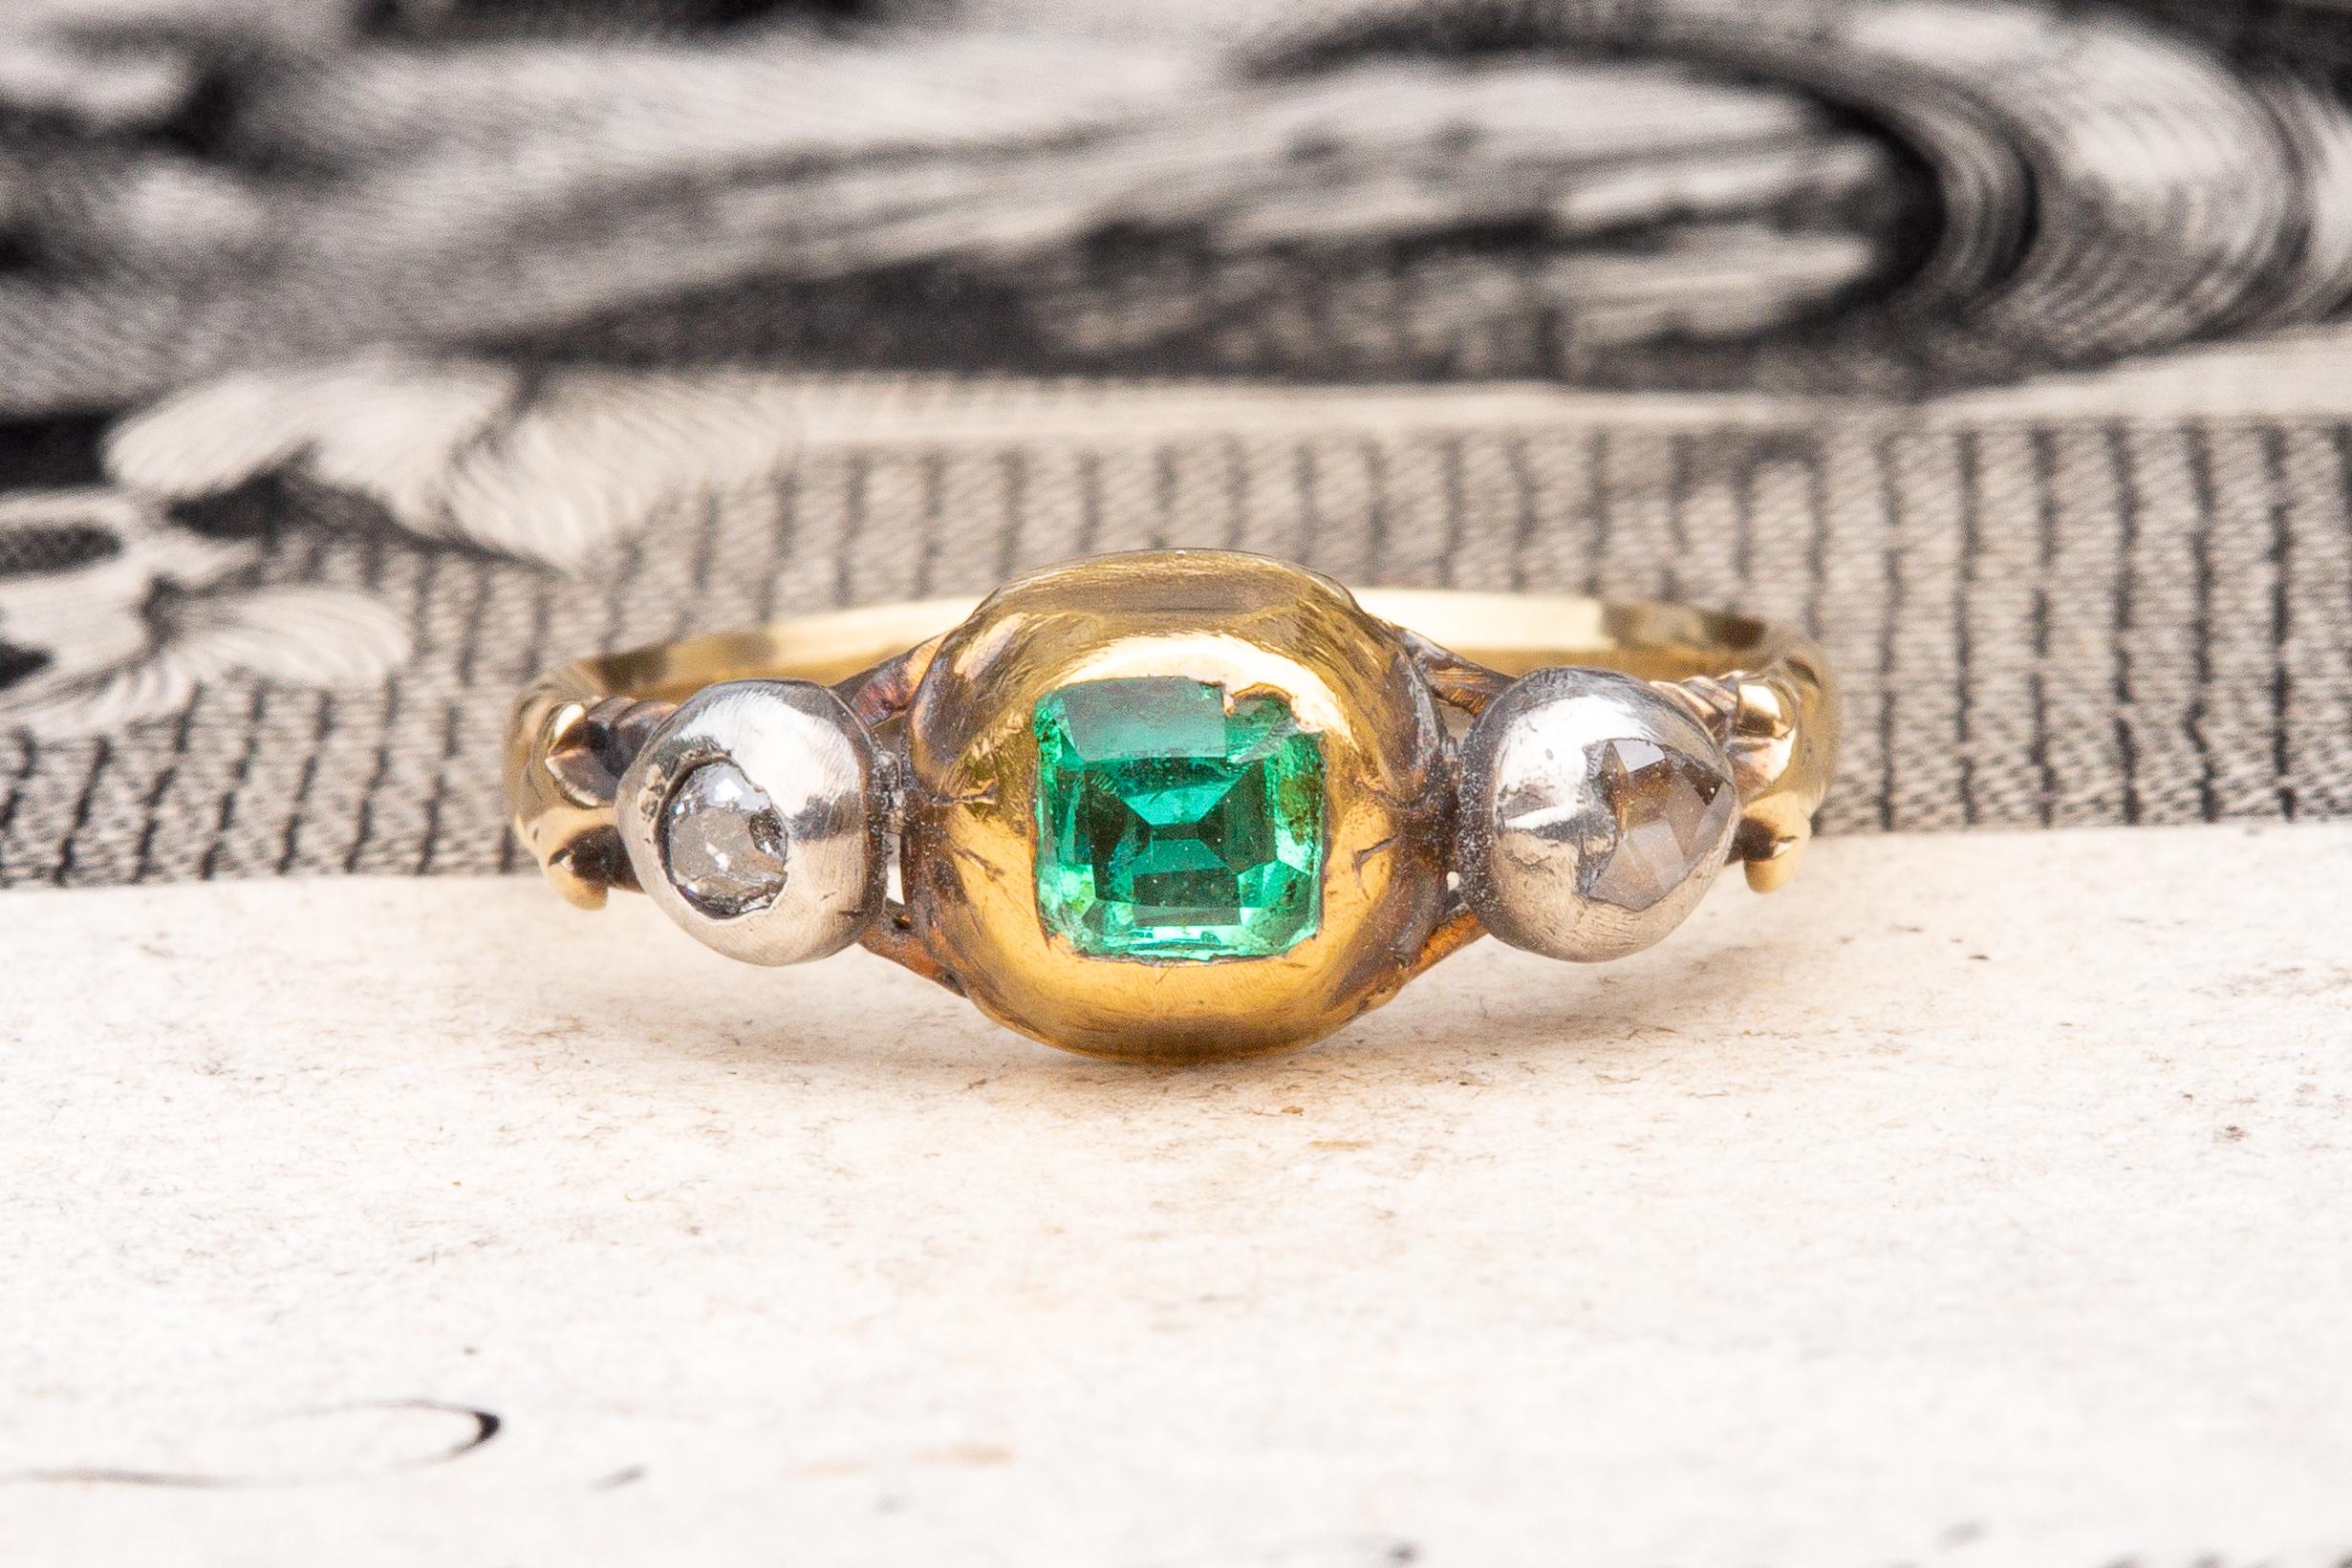 This outstanding gold three stone ring dates to around 1790 and was made in Western Europe. A table cut natural emerald, likely to be of Columbian origin, is mounted in a rub-over setting and displays a gorgeous bright green hue. 

It is flanked